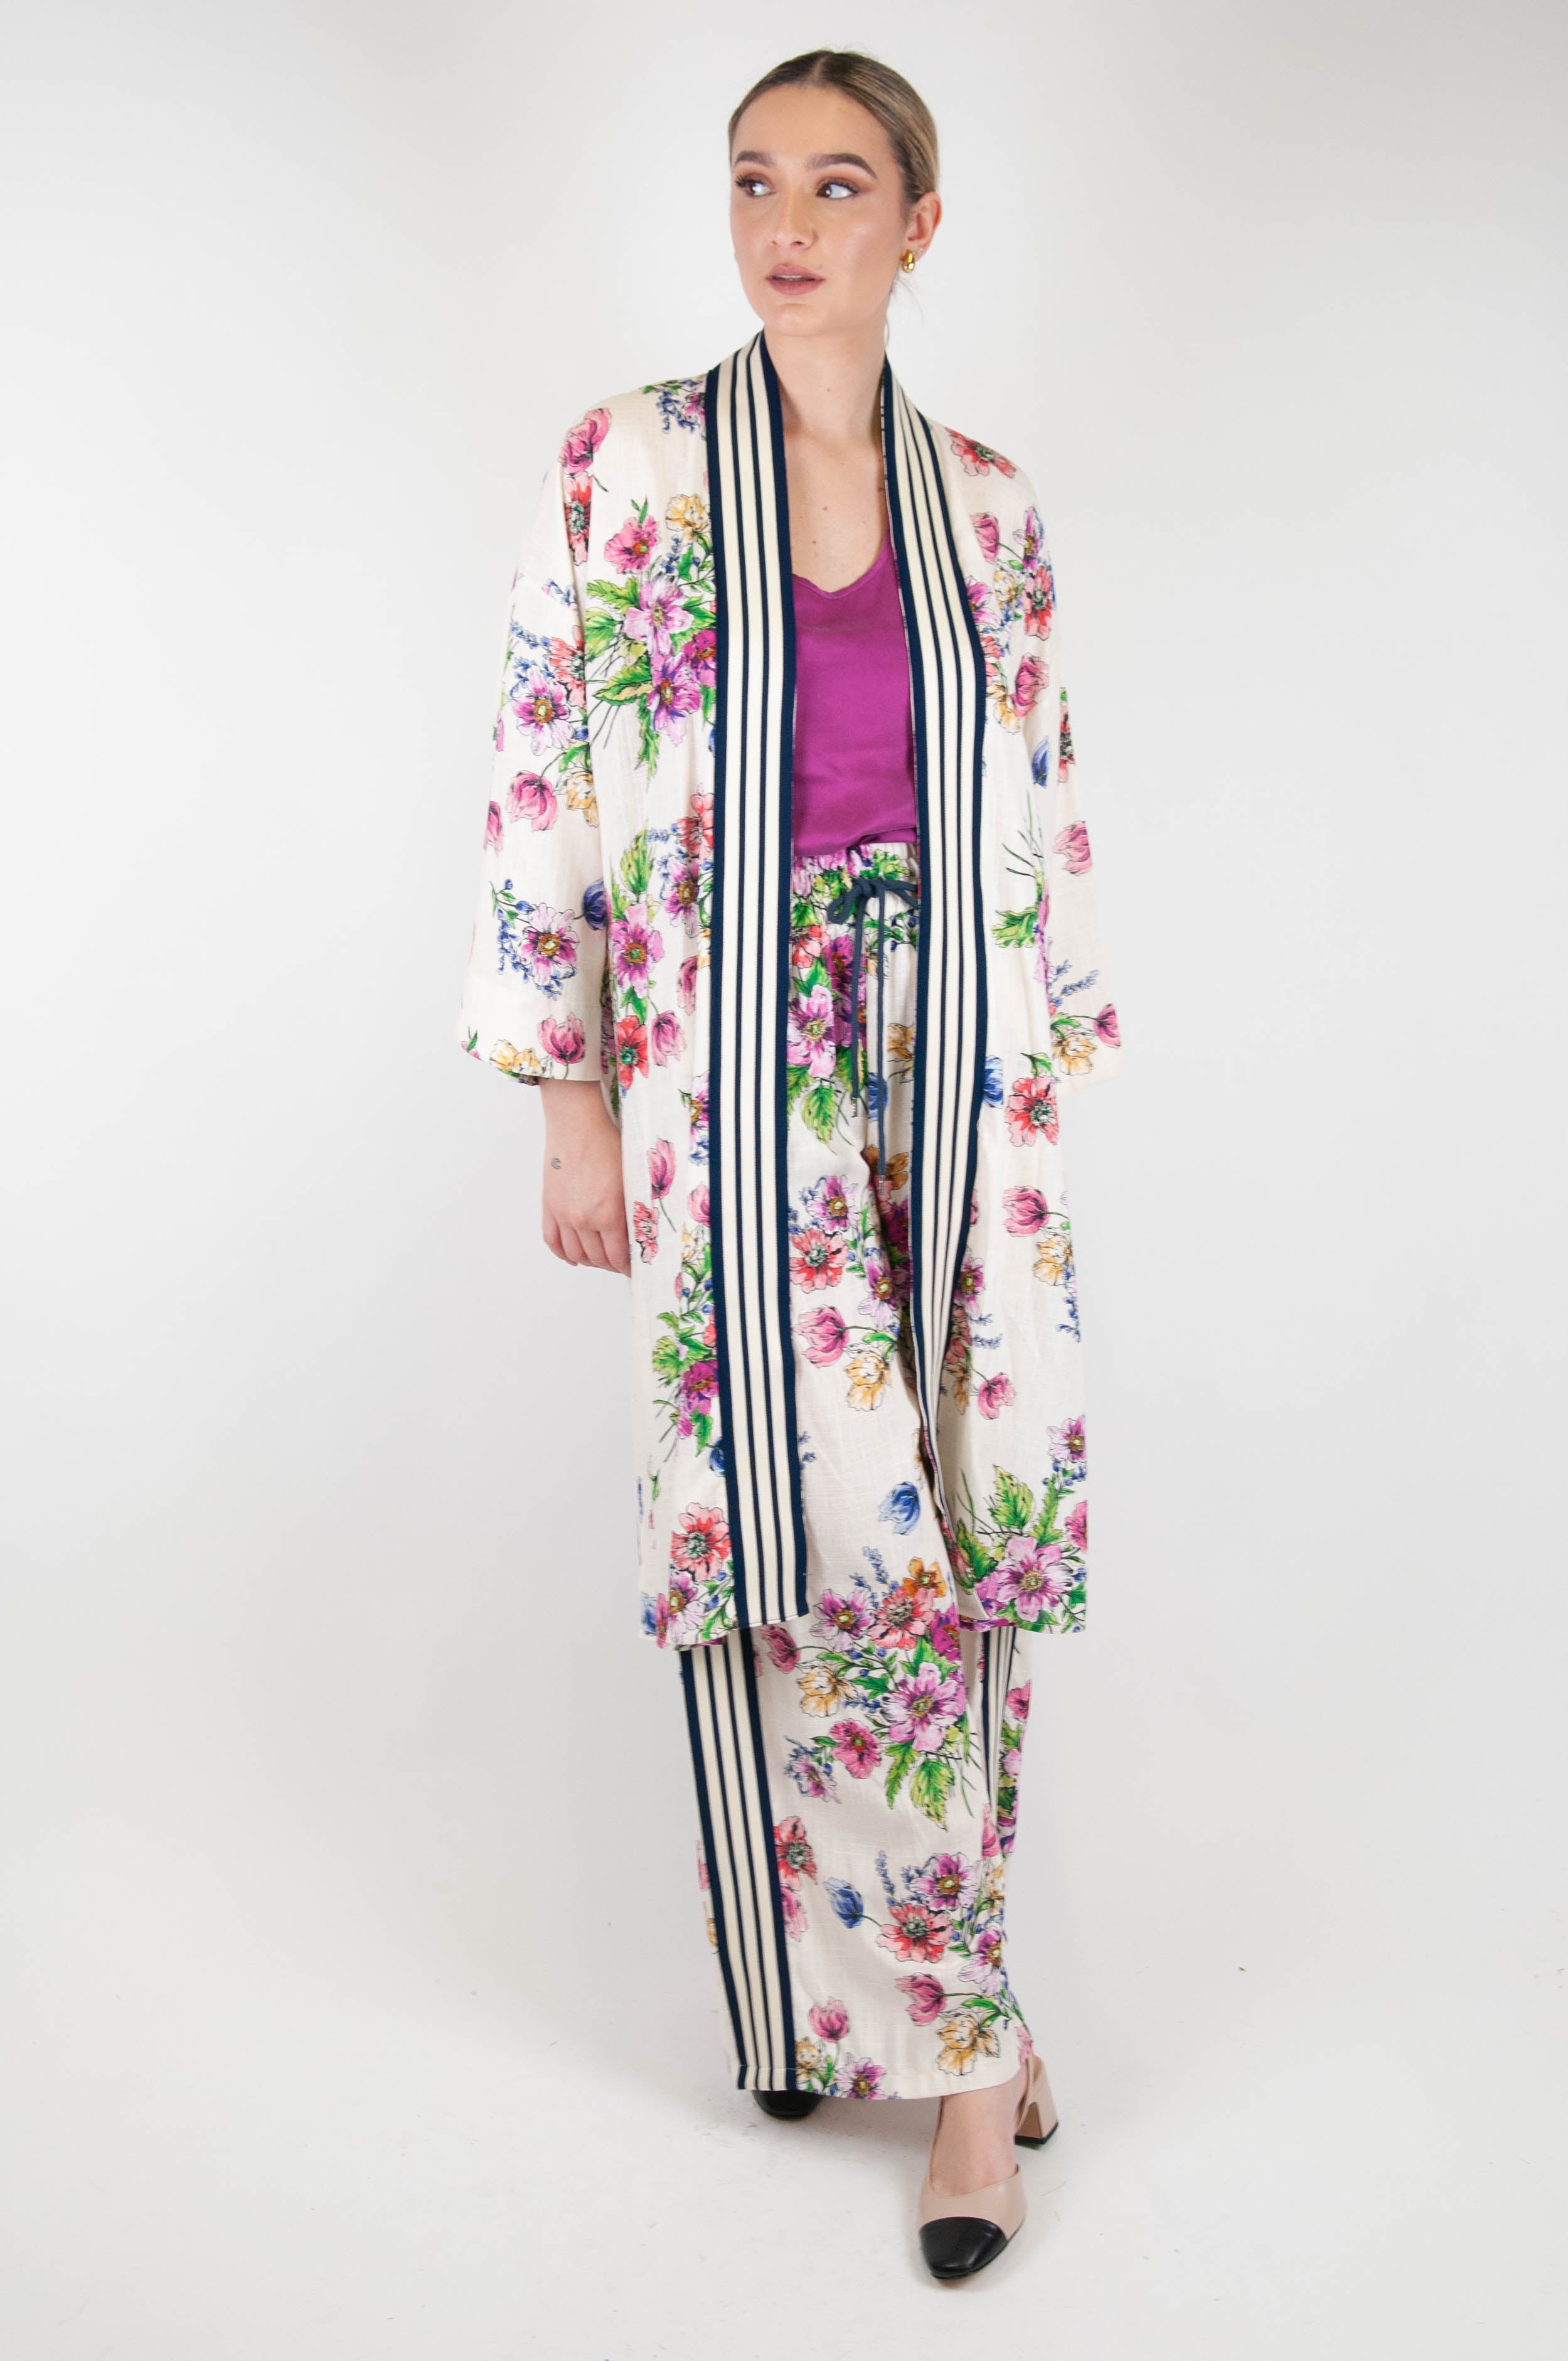 Motel - Floral patterned palazzo trousers in linen blend with drawstring and side band